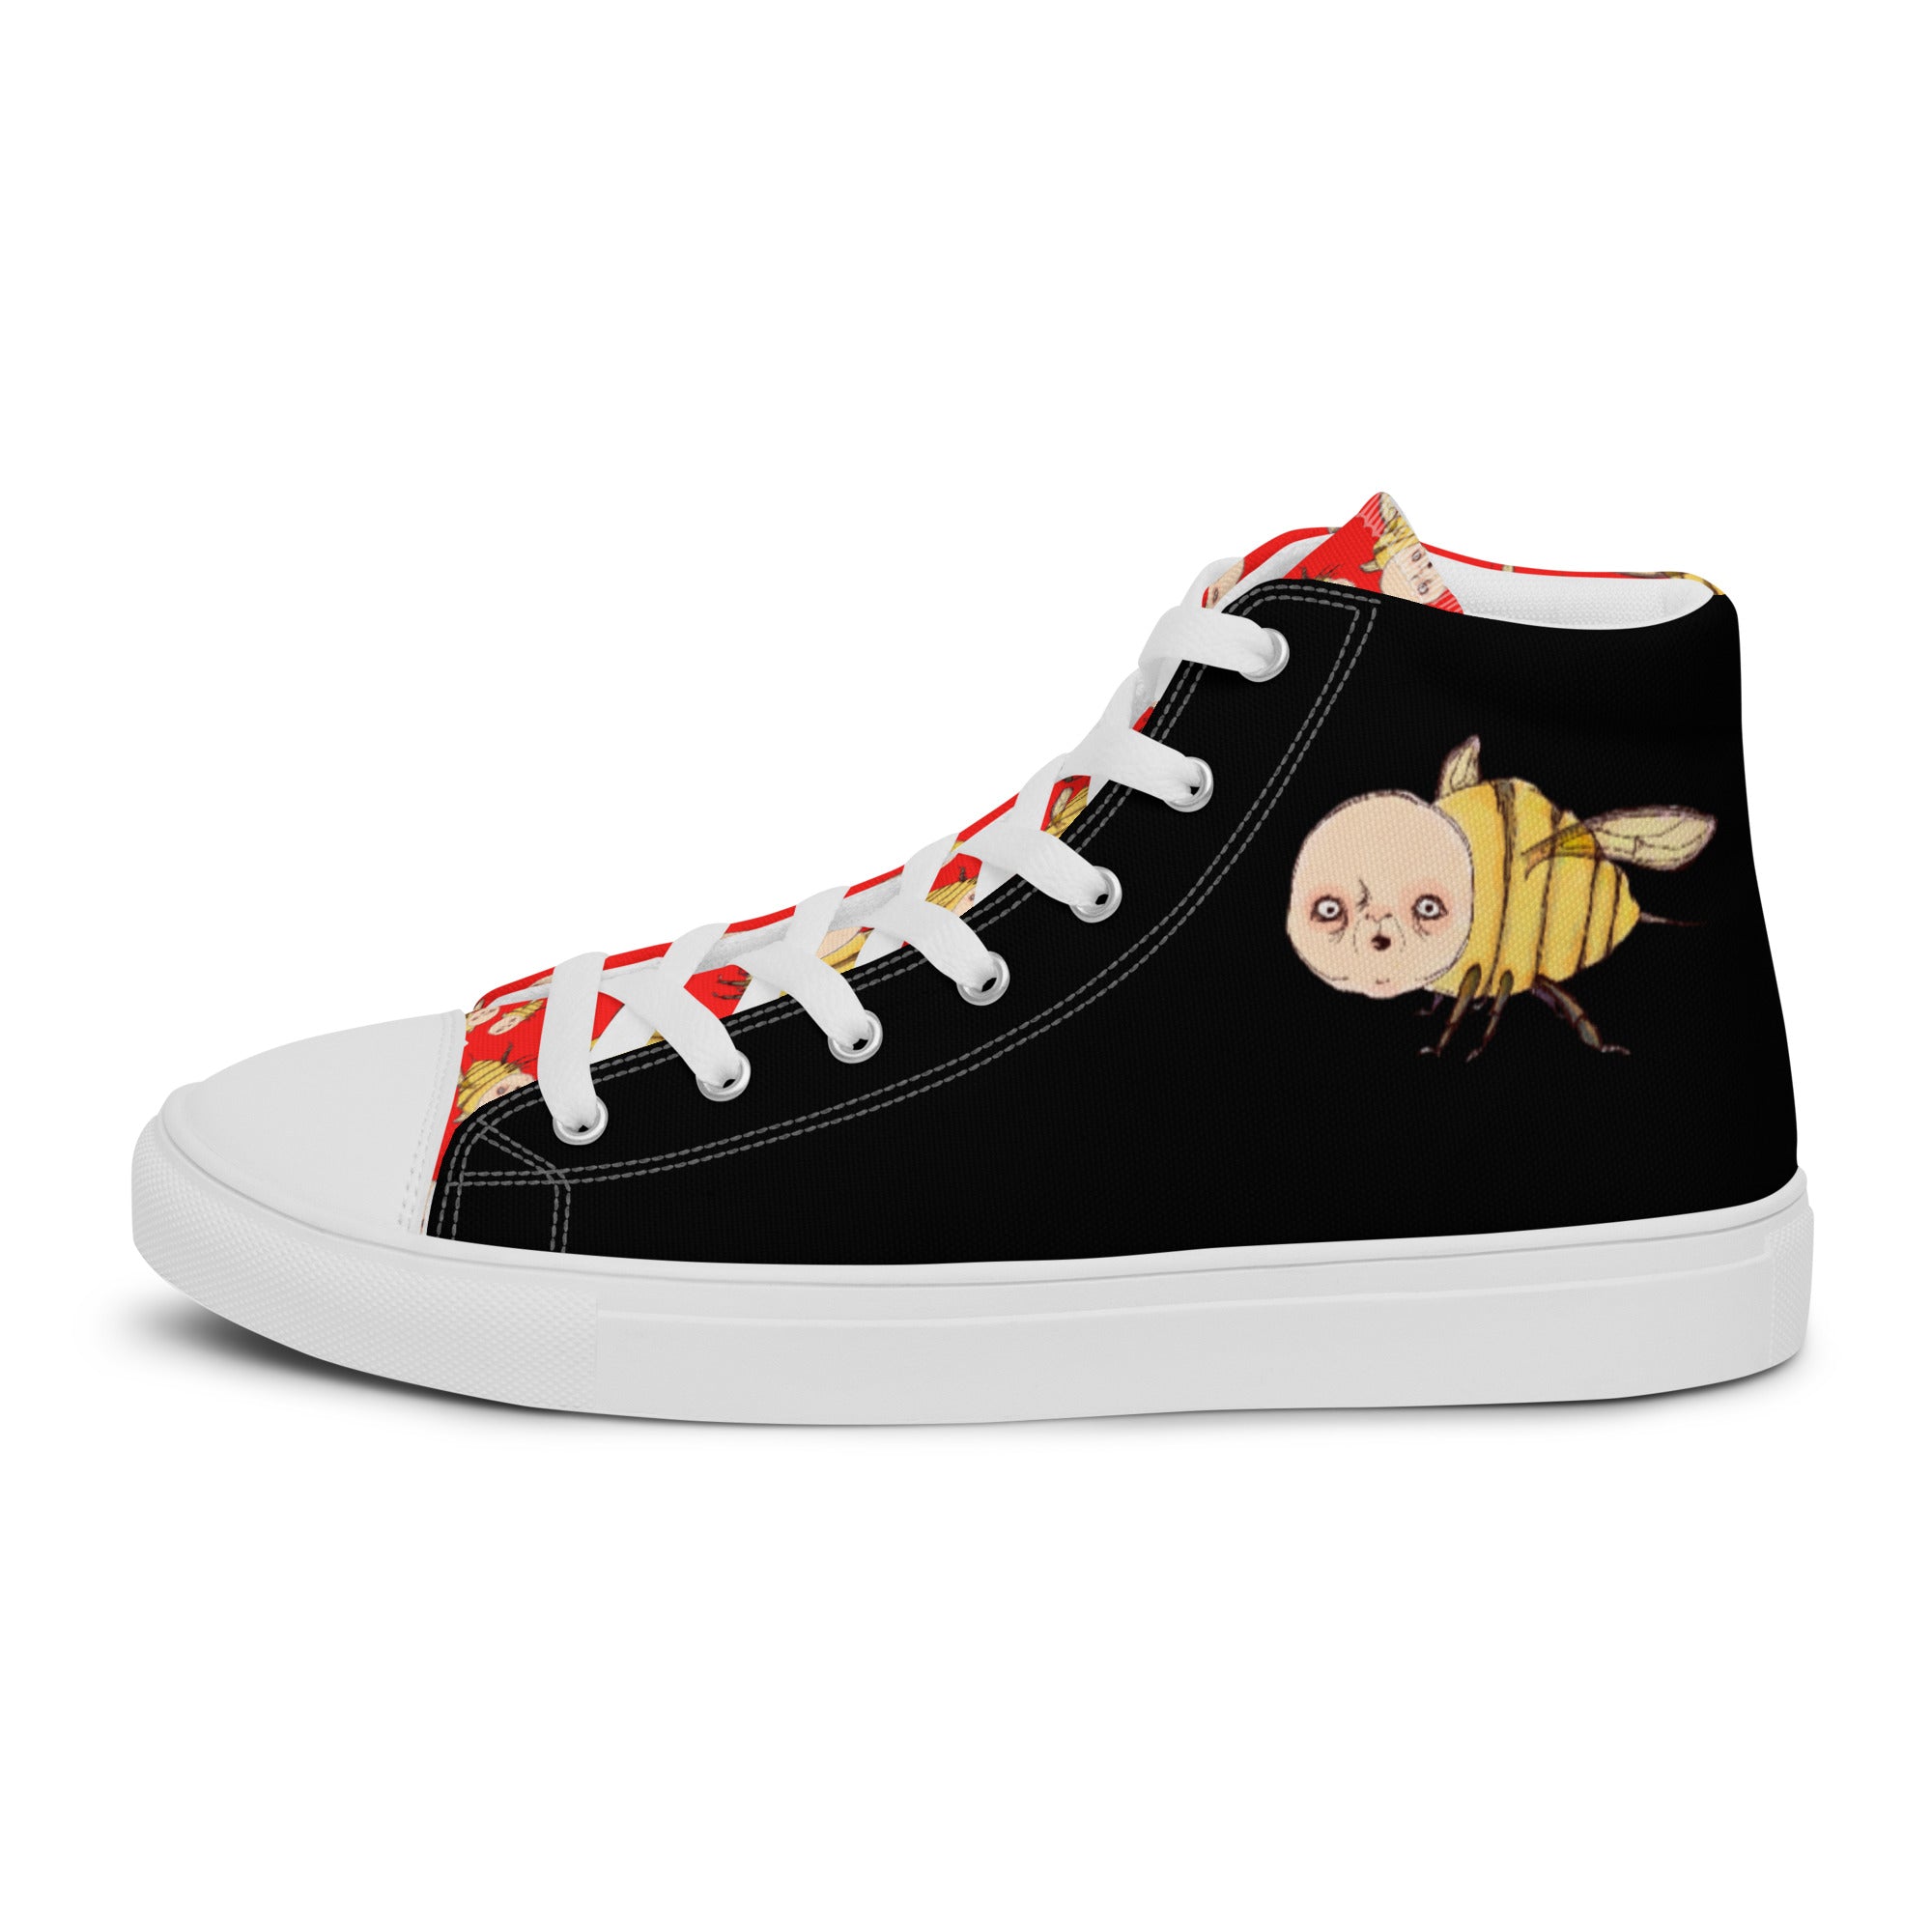 Men’s High Top Canvas Shoes- S1. Bee in Black and Red